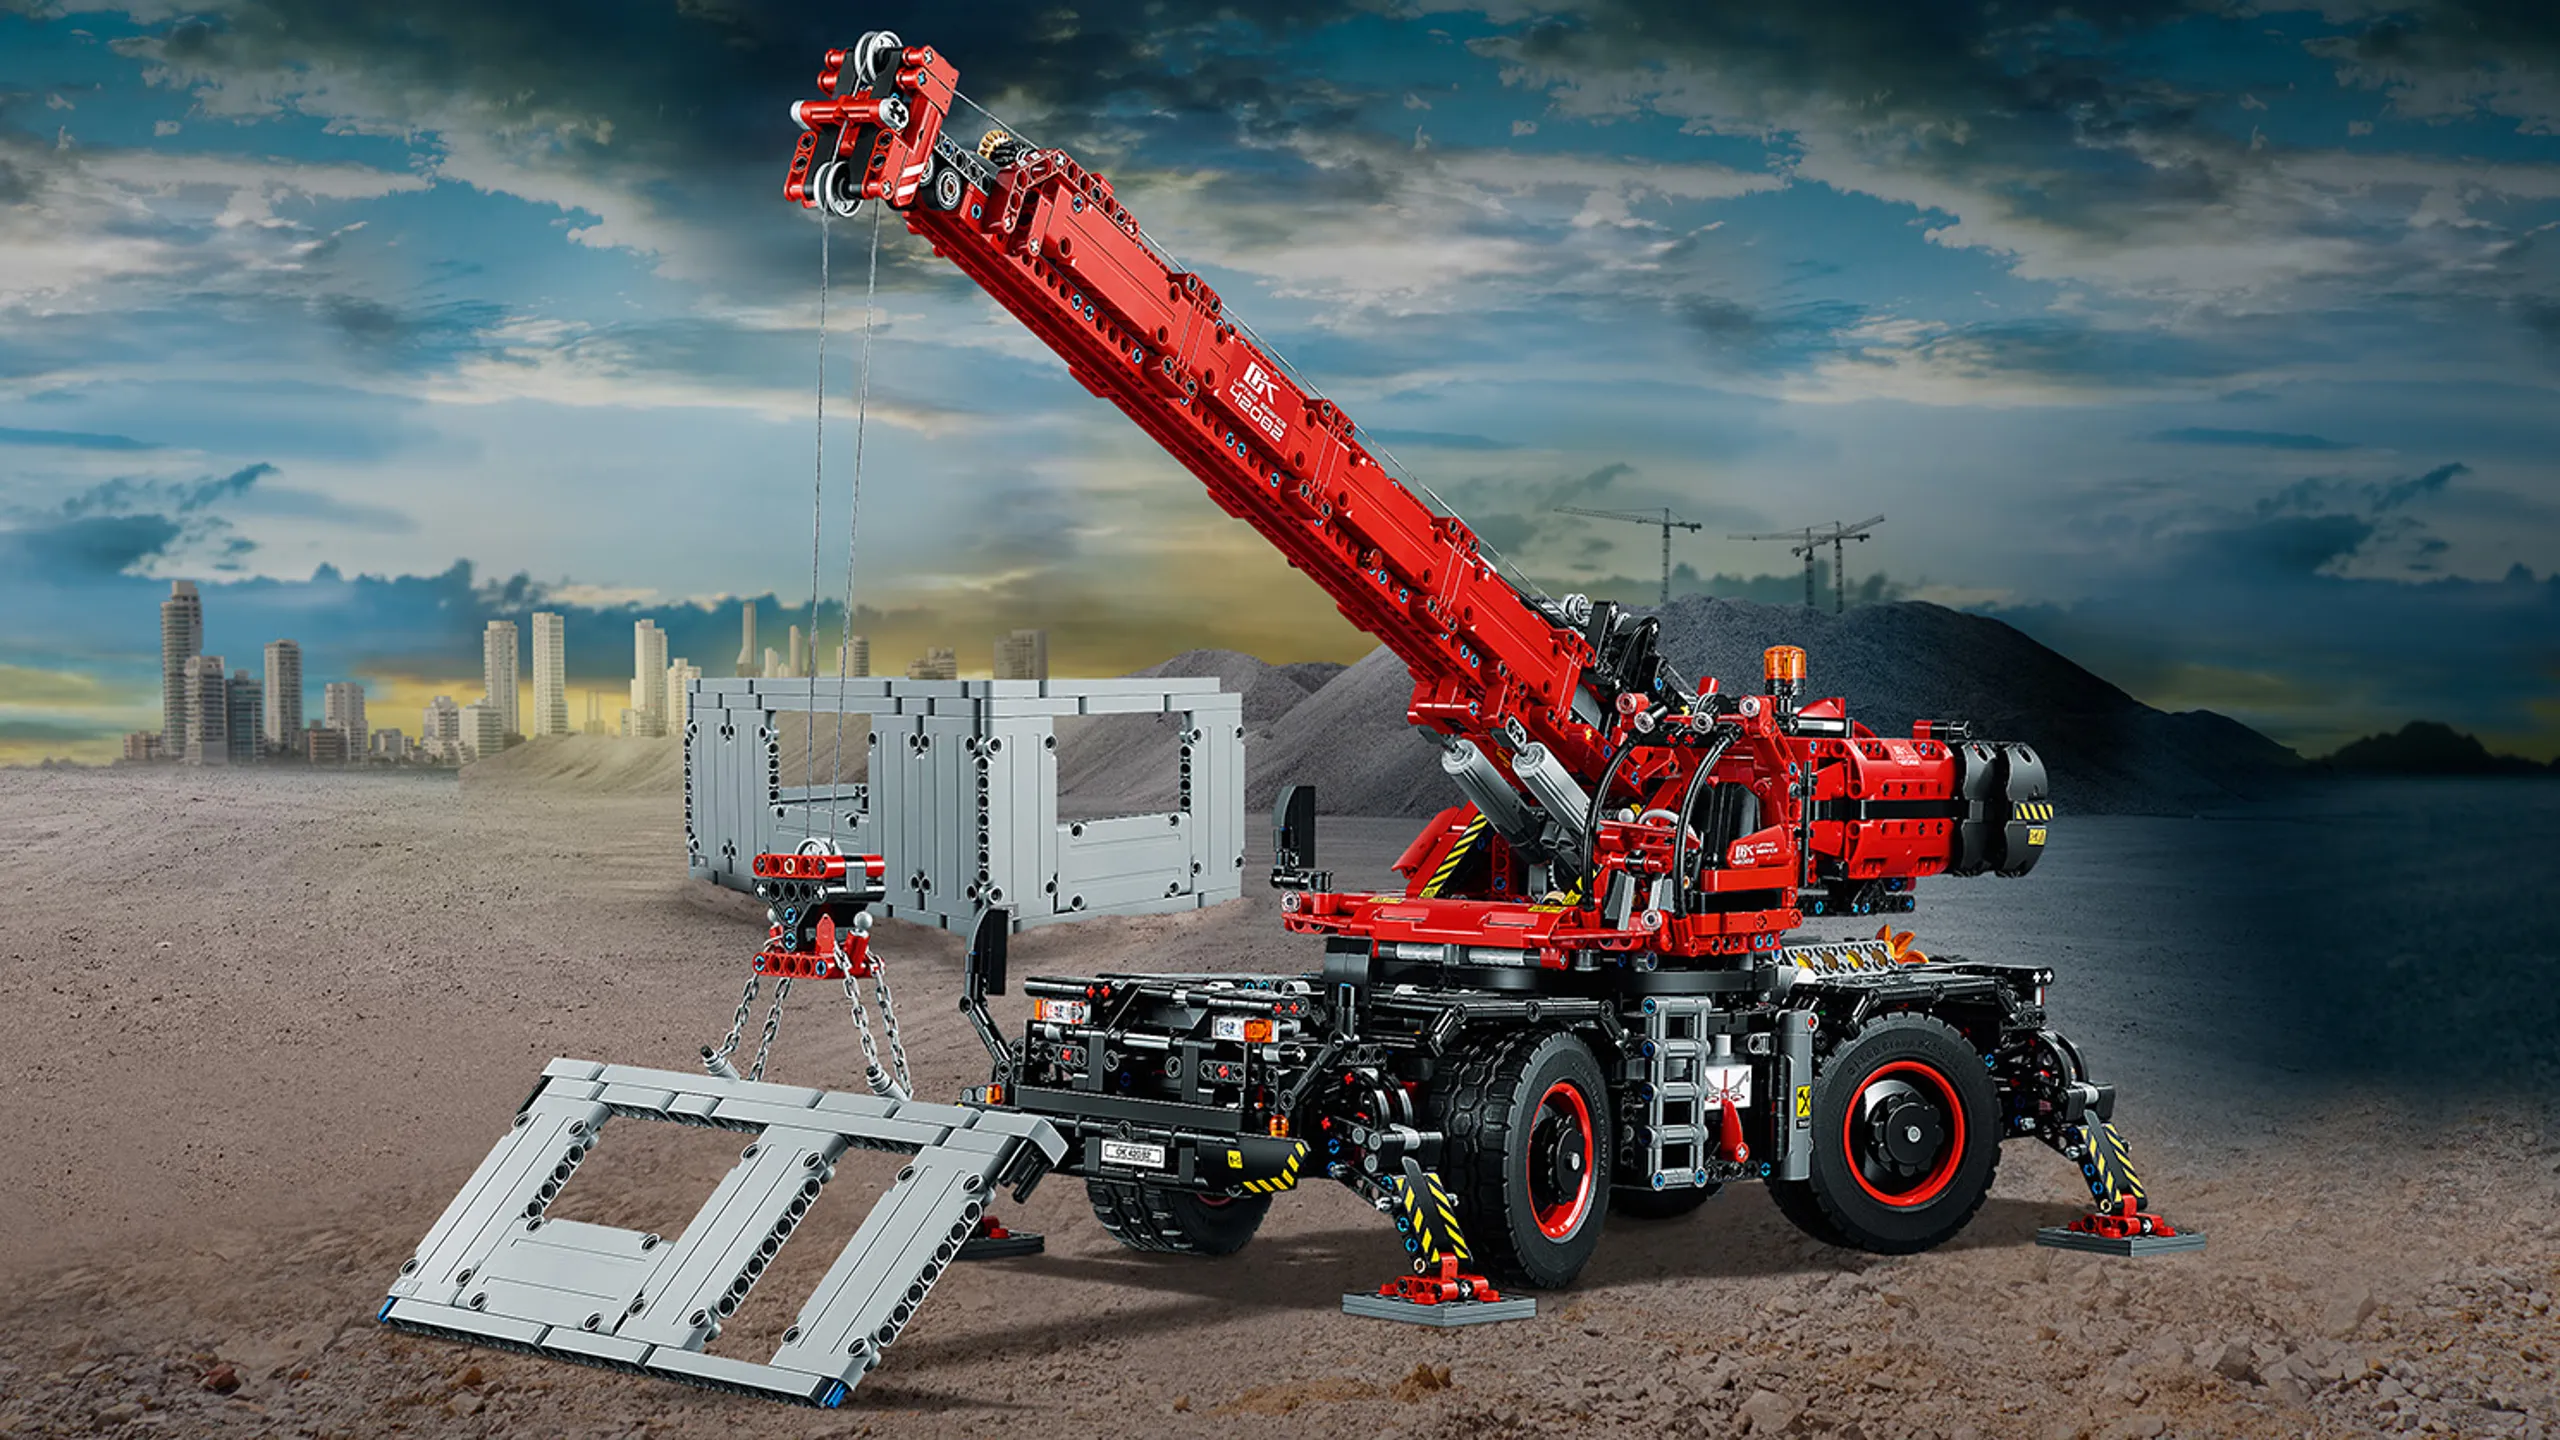 LEGO Technic - 42082 Rough Terrain Crane - This is the largest and tallest LEGO Technic crane to date, pre-August 2018! It's packed with functions and details and can be combined with the Power Functions motor.